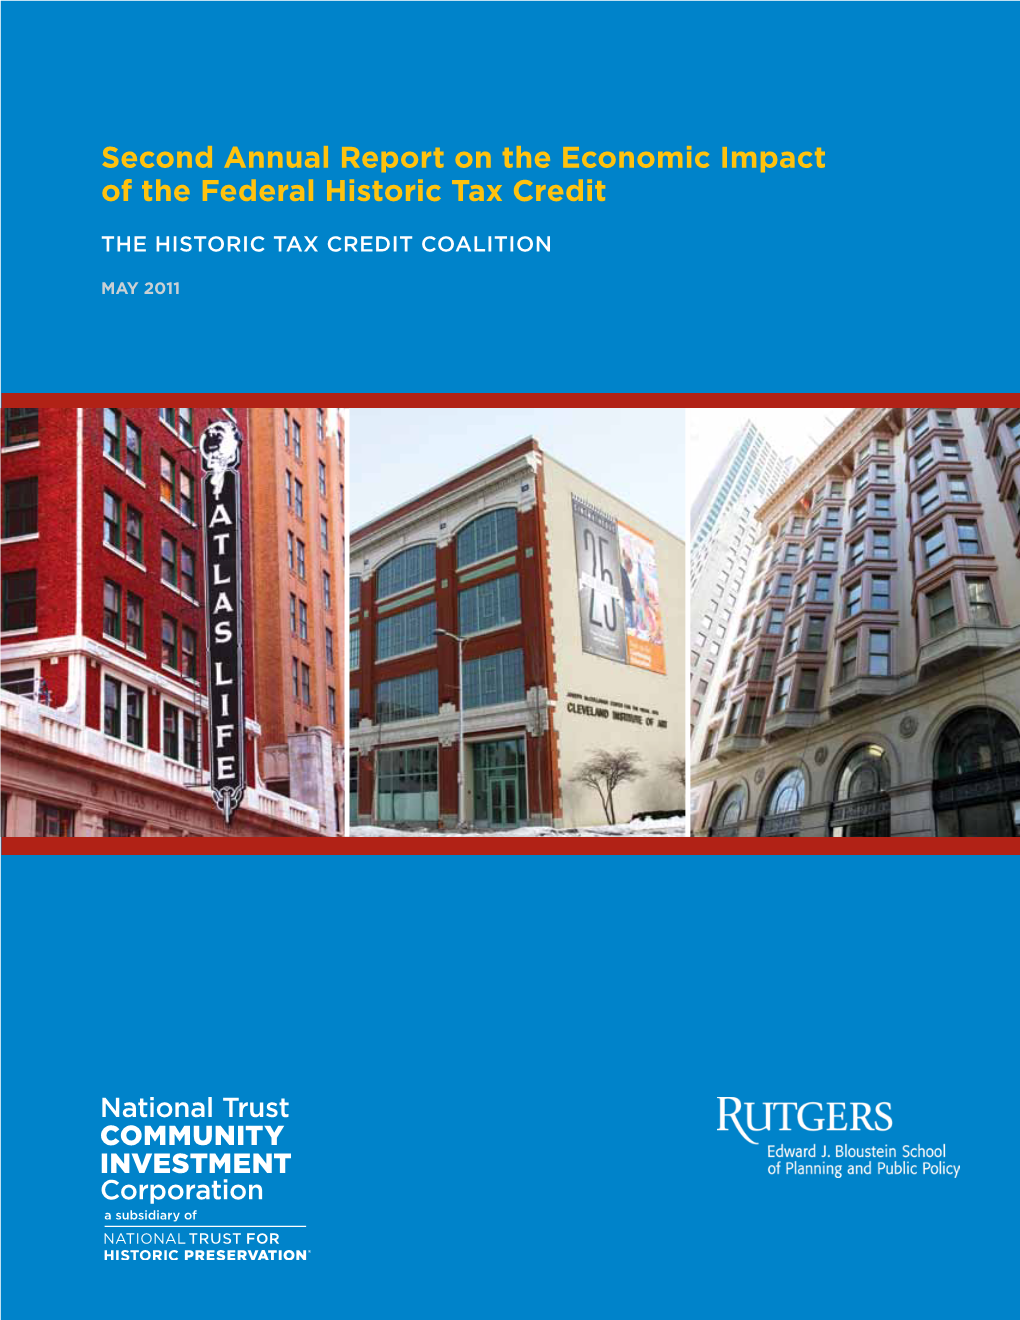 Second Annual Report on the Economic Impact of the Federal Historic Tax Credit